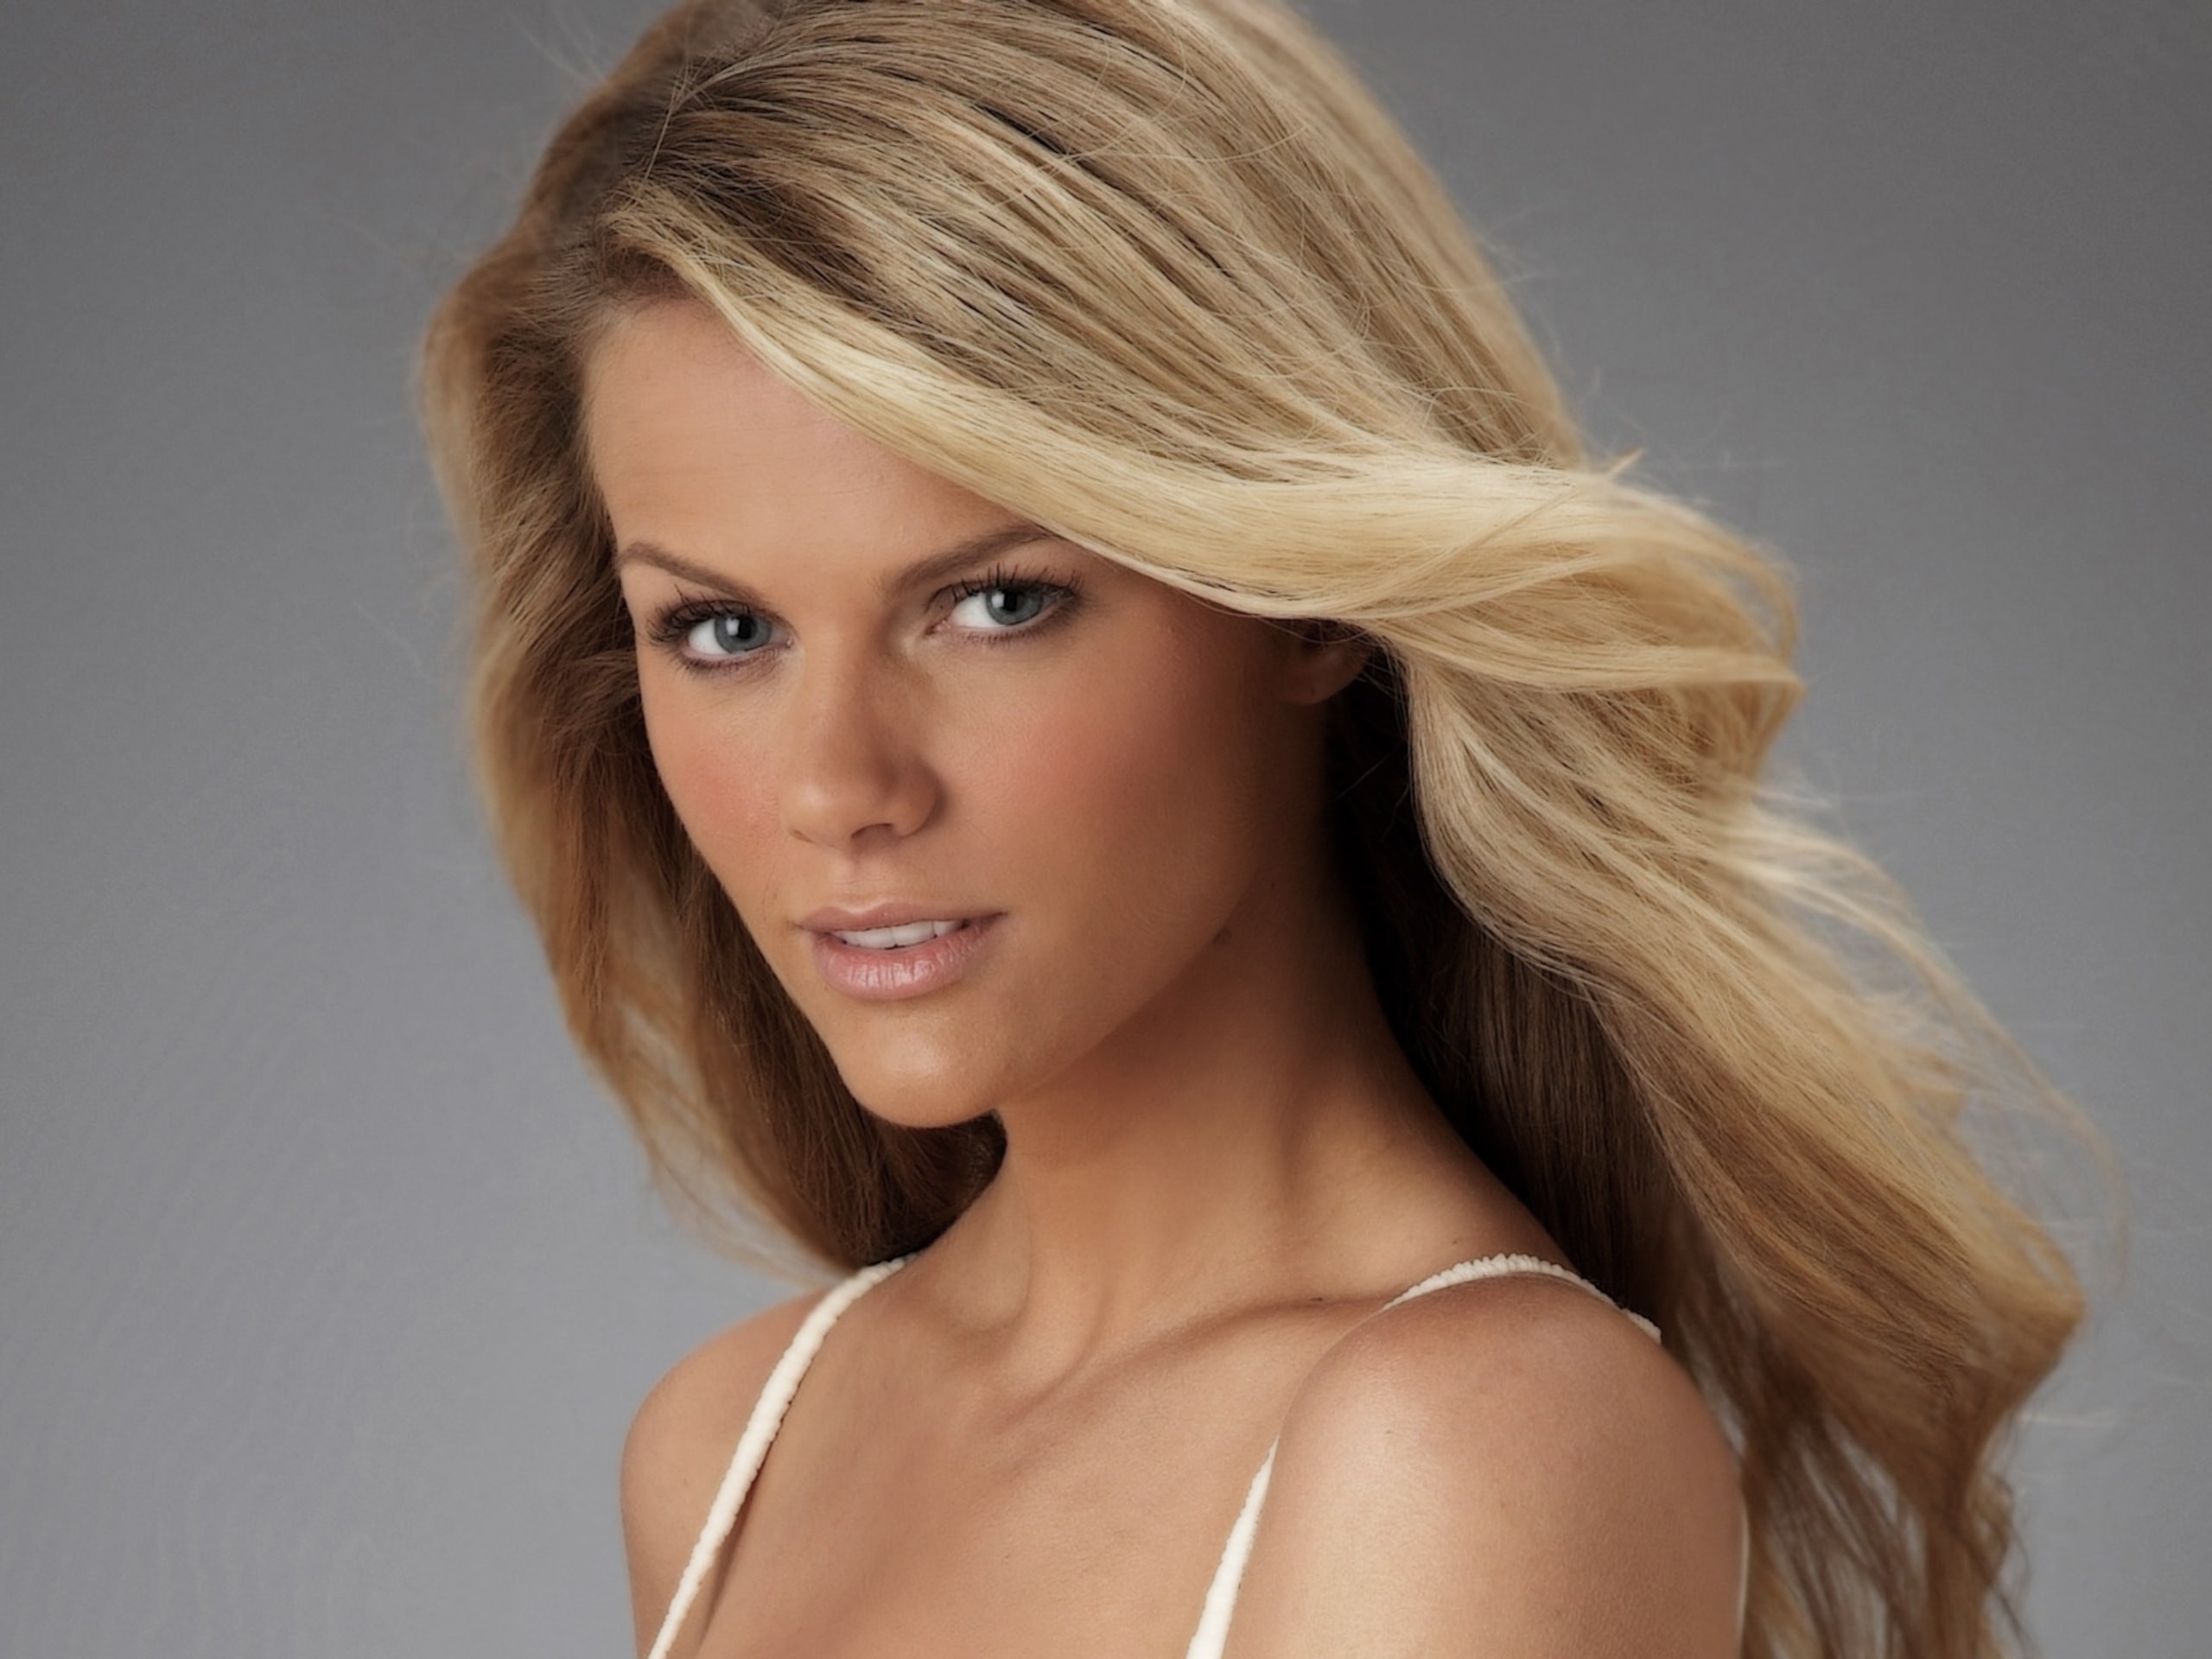 25 Brooklyn Decker Pictures Swanty Gallery